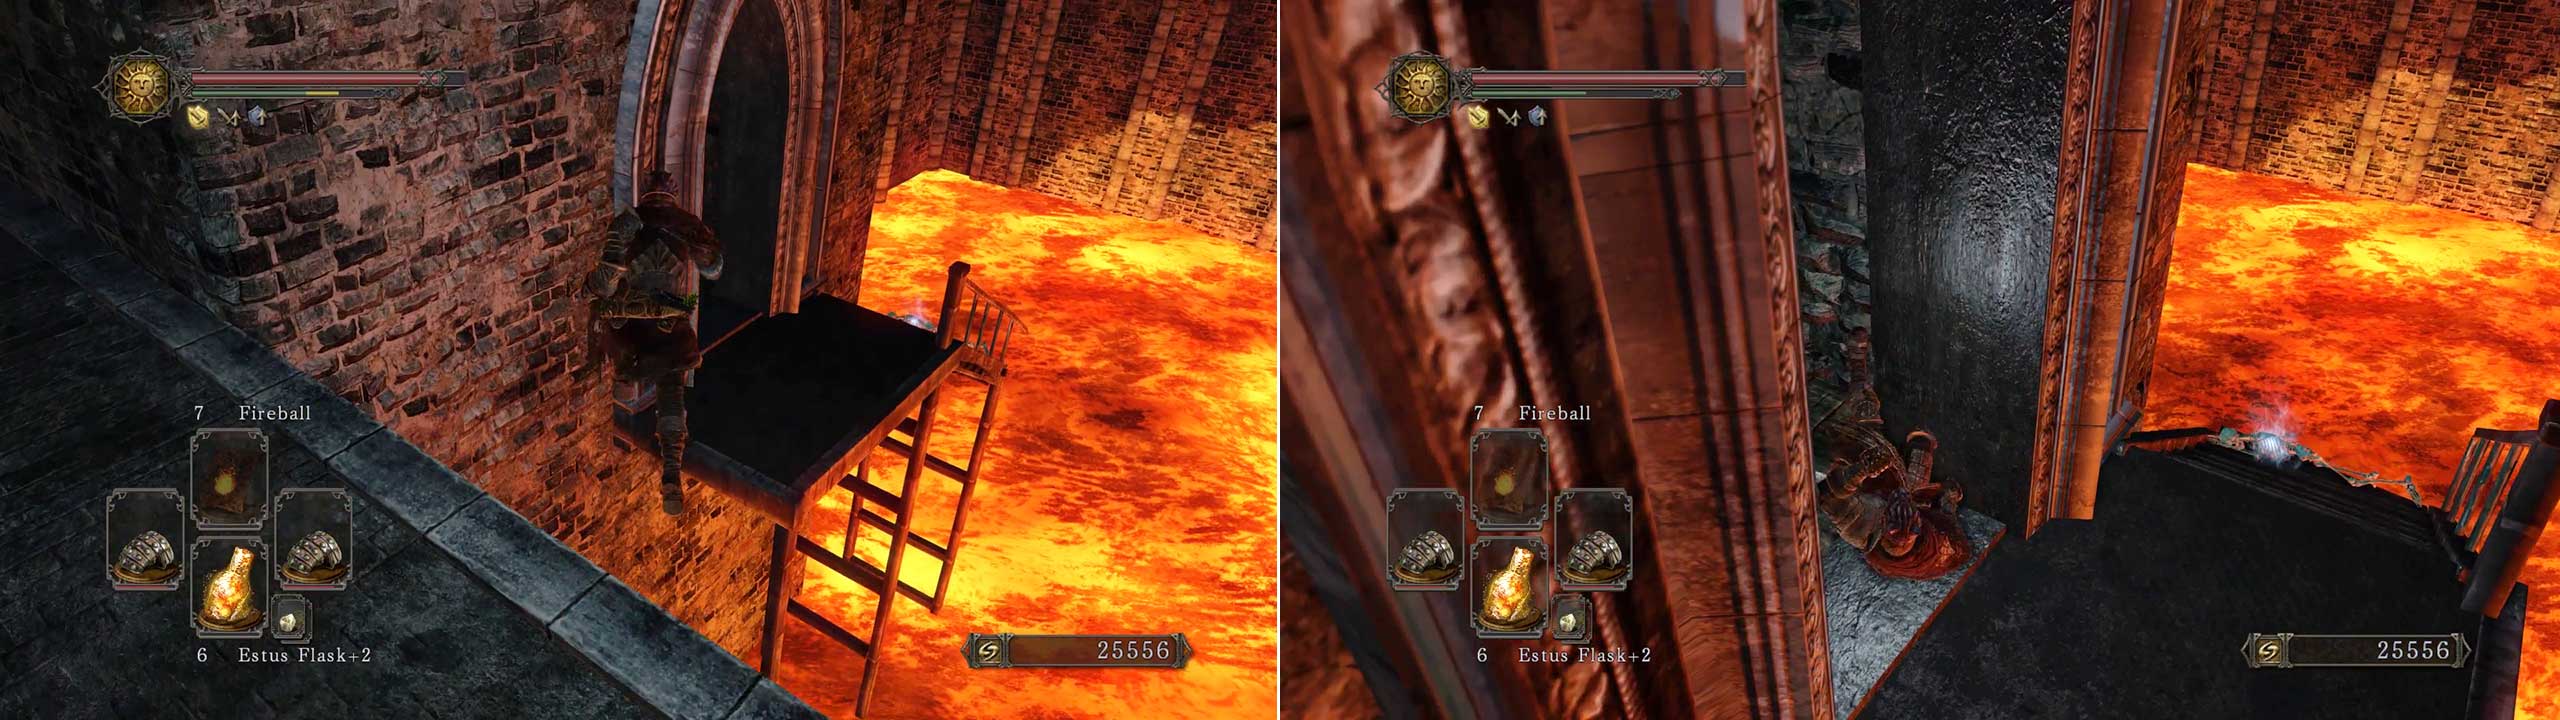 Now go back a bit and look for a metal walkway with an item on it. Aim your jump so you go for the door and you should stop before falling in to the lava.